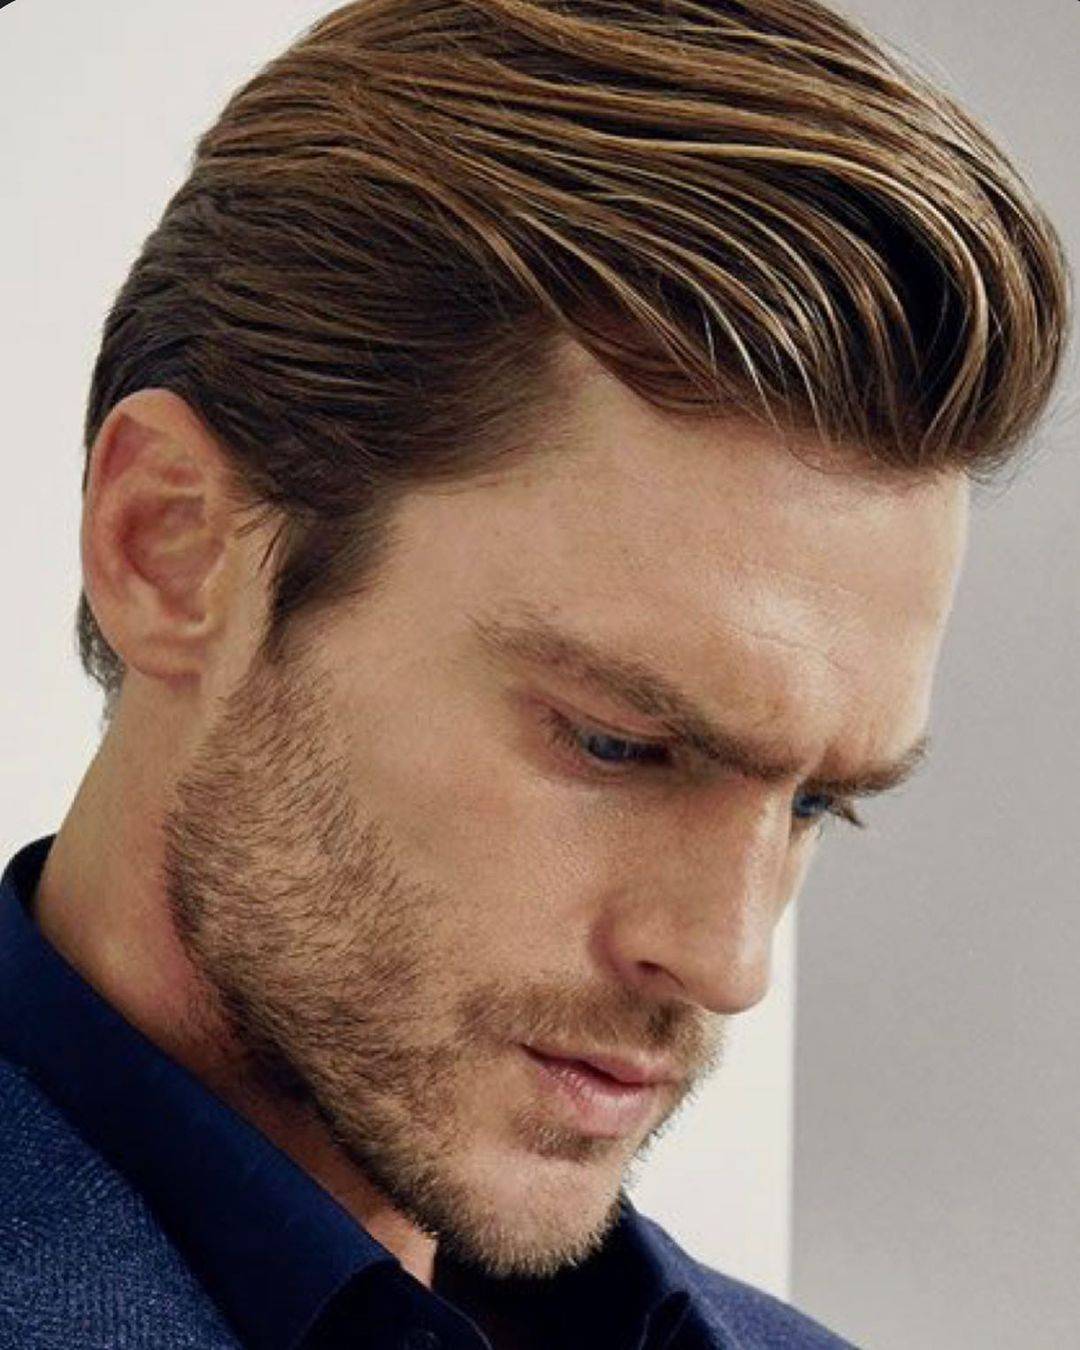 Hairstyle for Men 668 best haircut for men | haircut for men | haircuts for men Haircut for Men